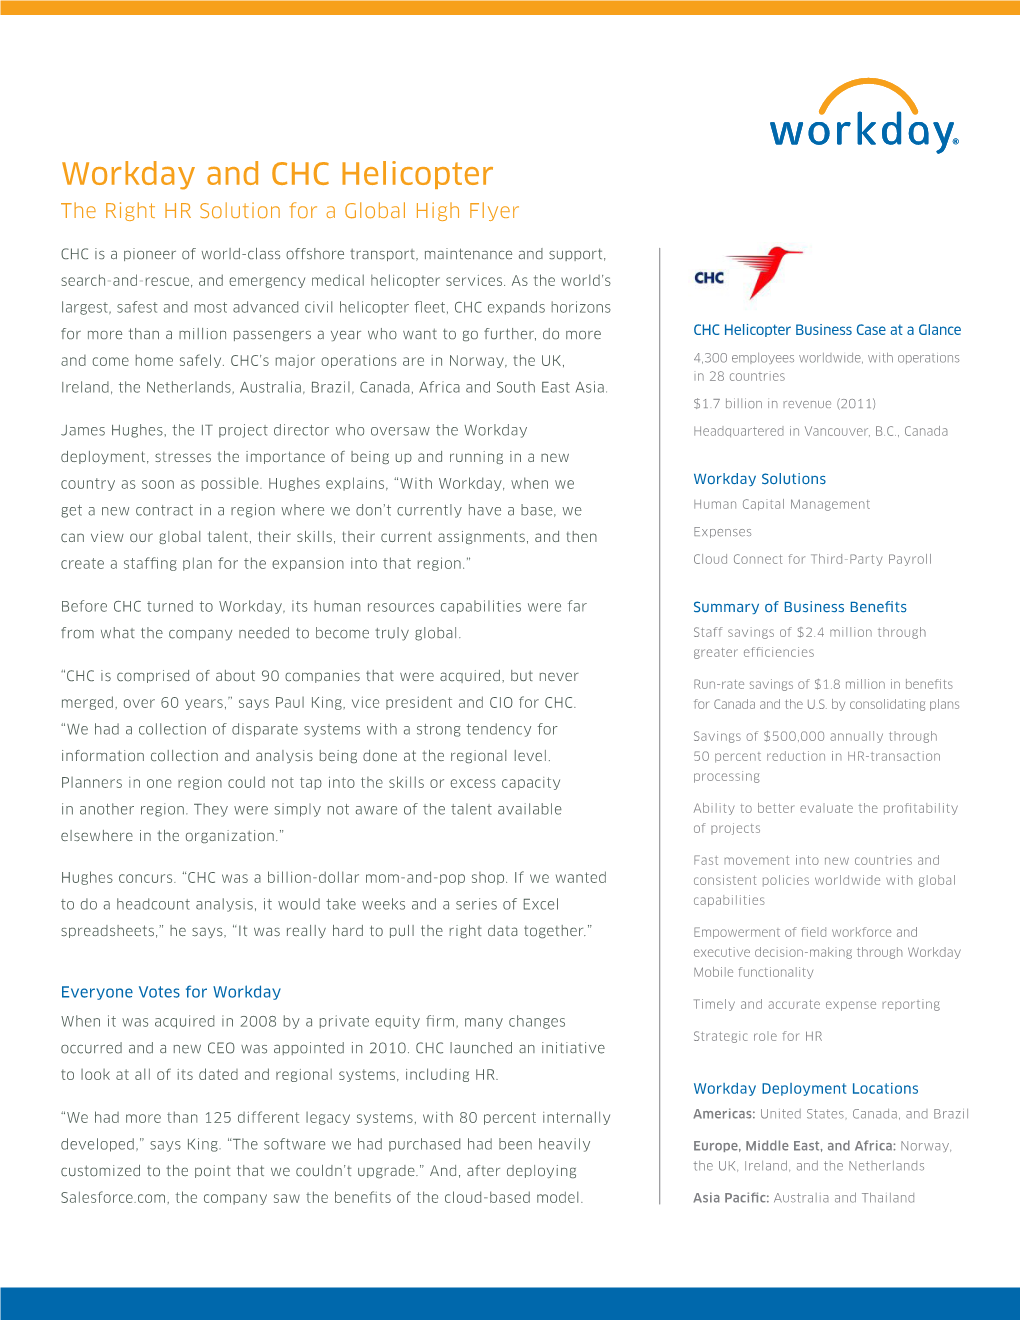 Workday and CHC Helicopter the Right HR Solution for a Global High Flyer